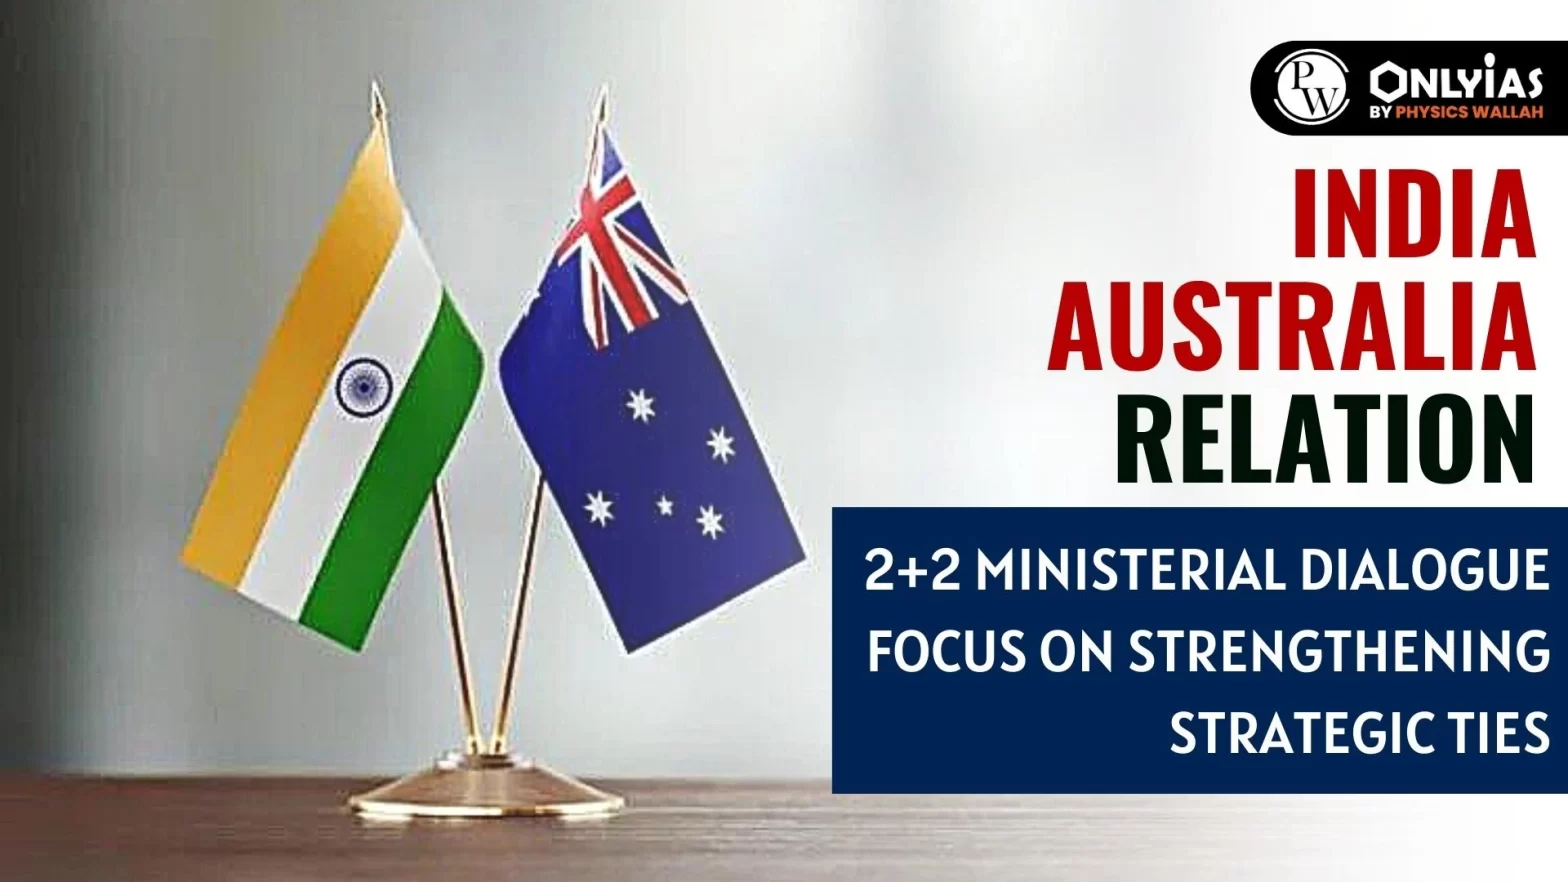 India Australia Relation: 2+2 Ministerial Dialogue focus on Strengthening Strategic Ties